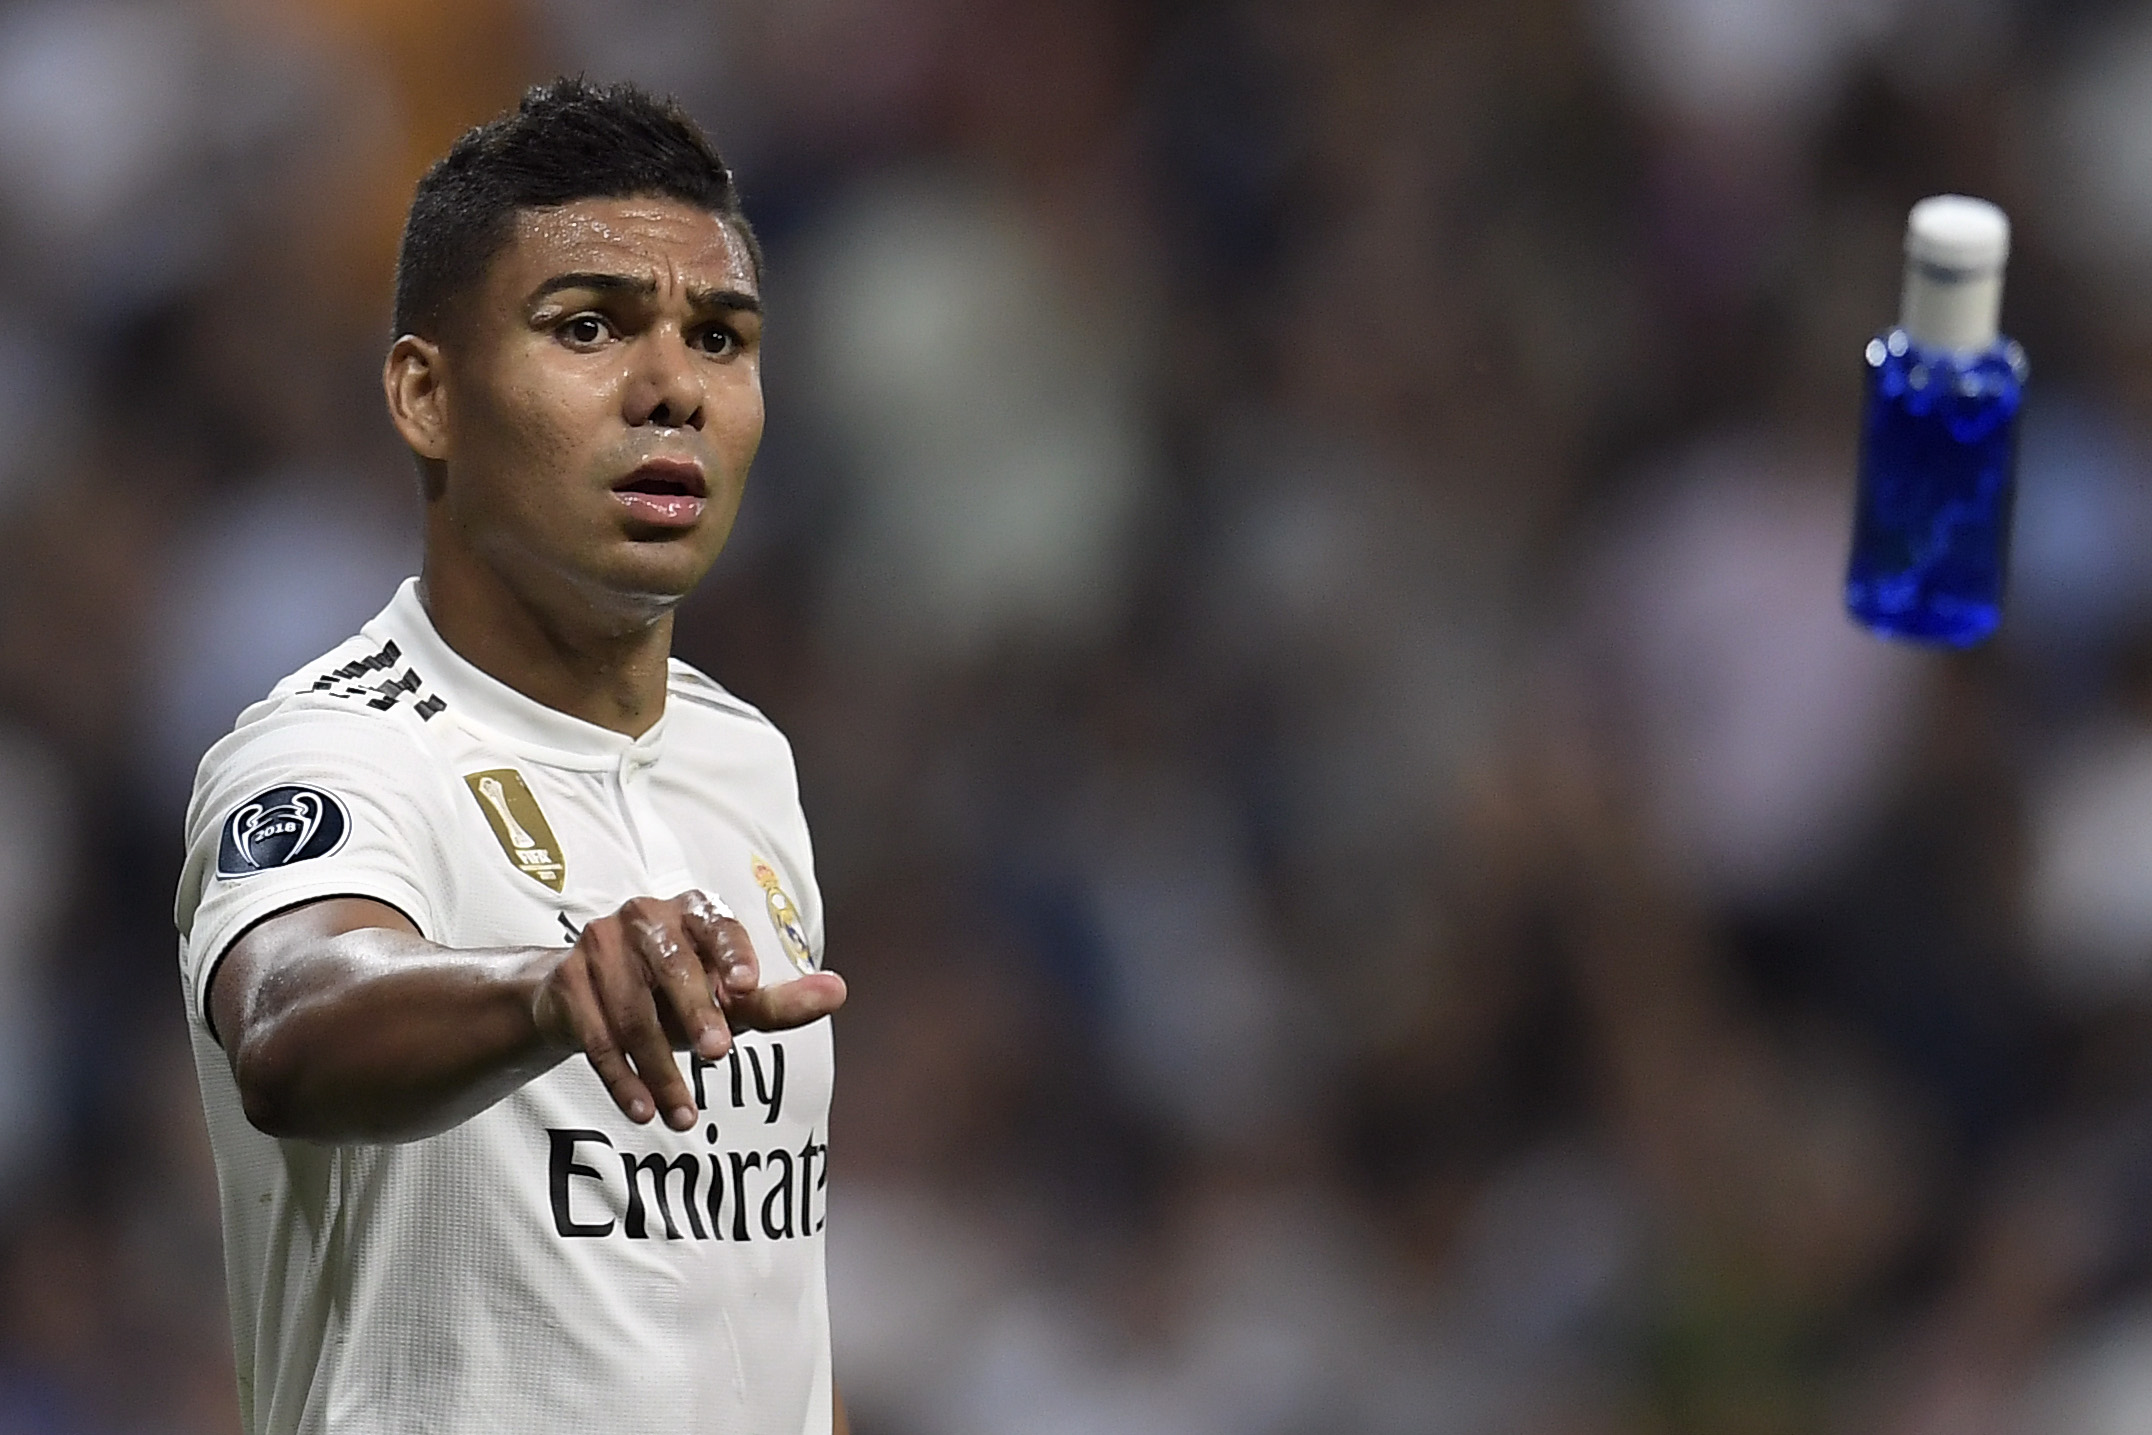 Real Madrid's Brazilian midfielder Casemiro throws a bottle of water to a teammates during the UEFA Champions League group G football match between Real Madrid CF and AS Roma at the Santiago Bernabeu stadium in Madrid on September 19, 2018. (Photo by OSCAR DEL POZO / AFP)        (Photo credit should read OSCAR DEL POZO/AFP/Getty Images)